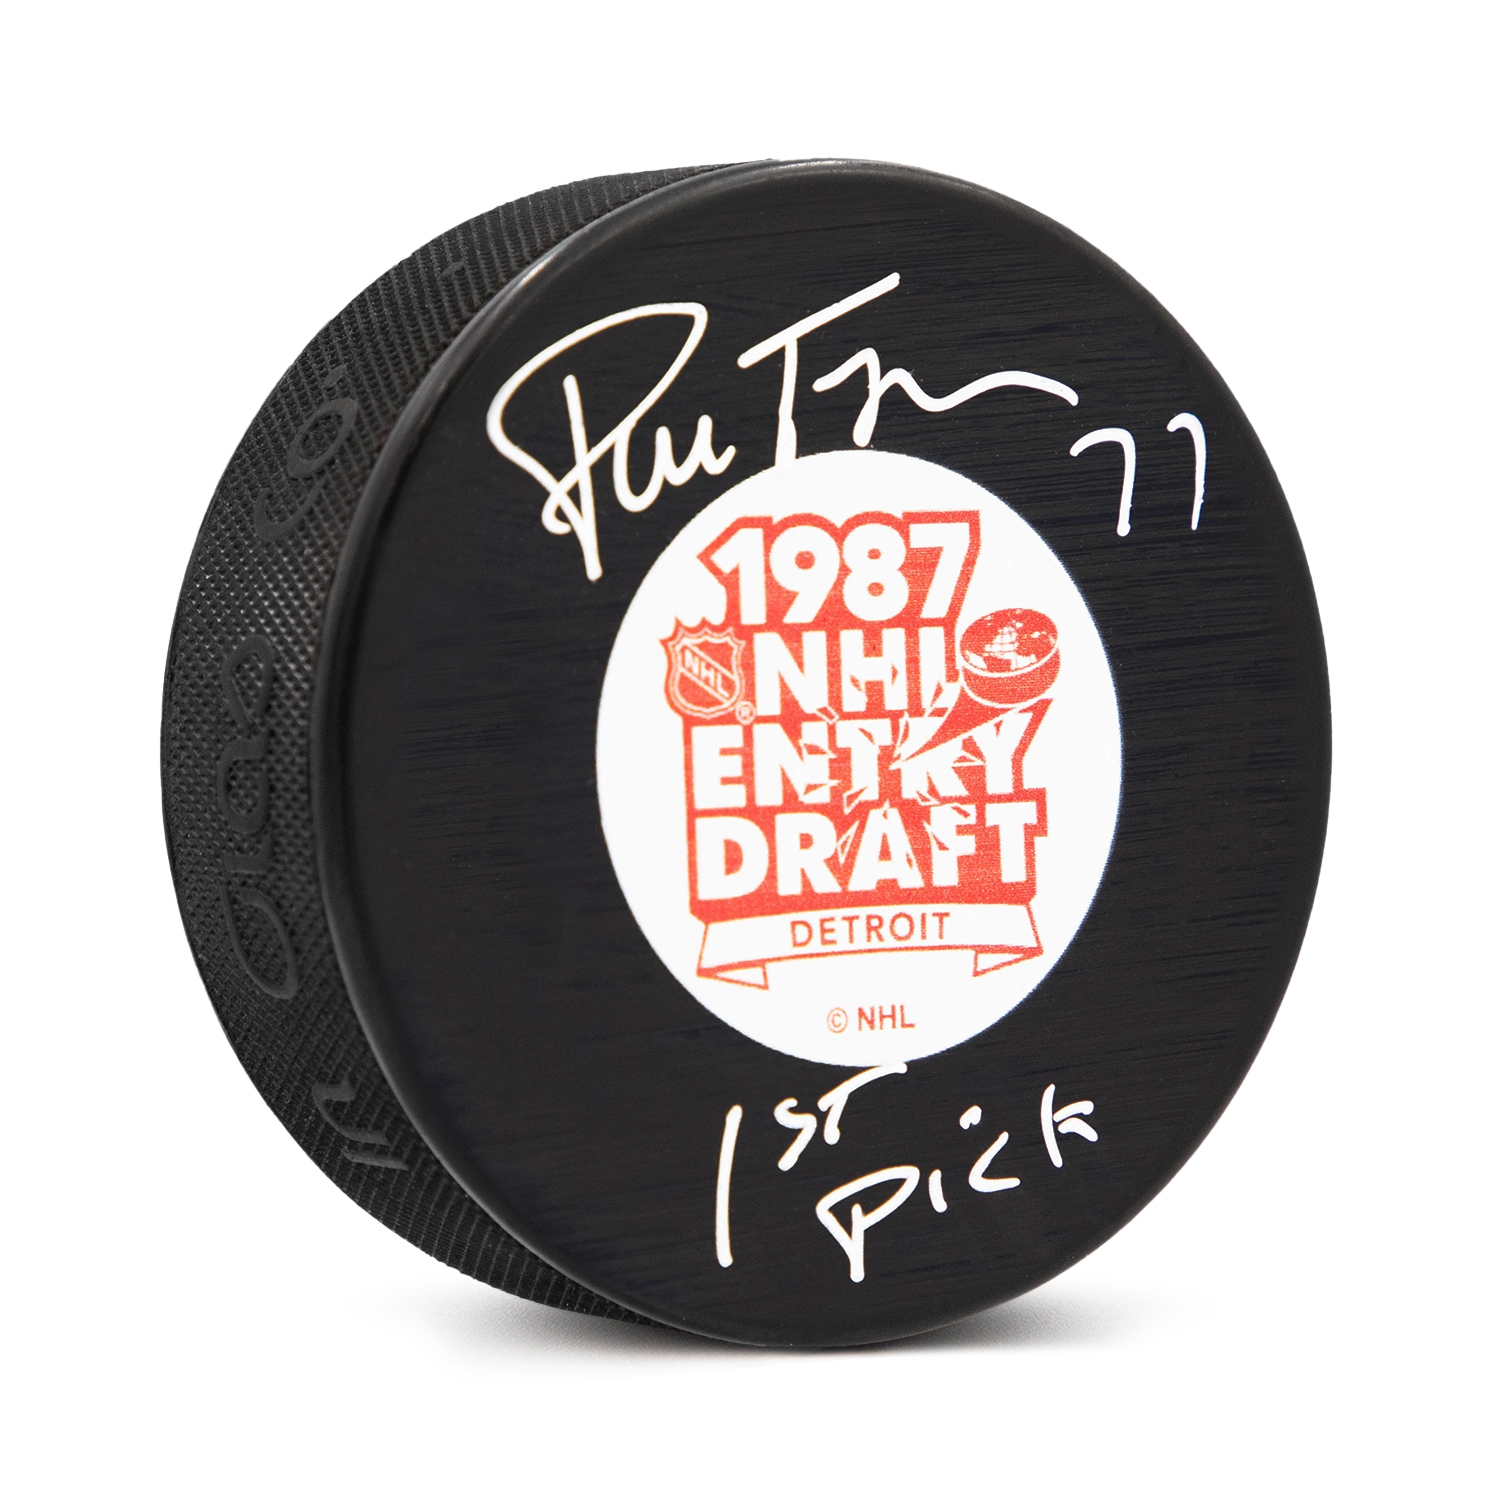 Pierre Turgeon Autographed 1987 NHL Entry Draft Puck with 1st Pick Note